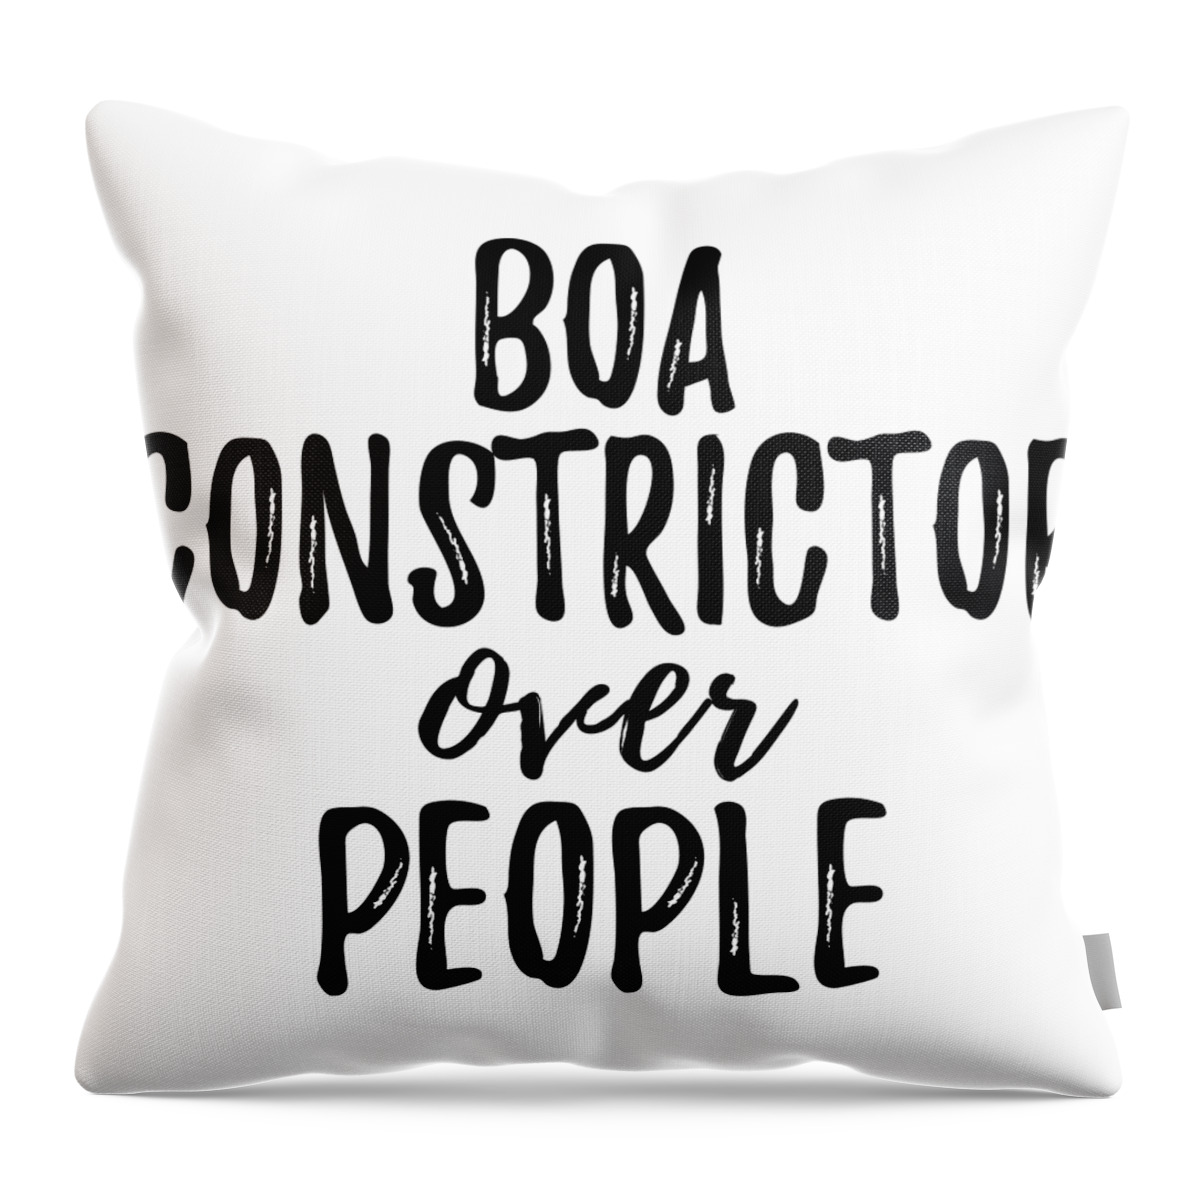 Boa Constrictor Throw Pillow featuring the digital art Boa Constrictor Over People by Jeff Creation